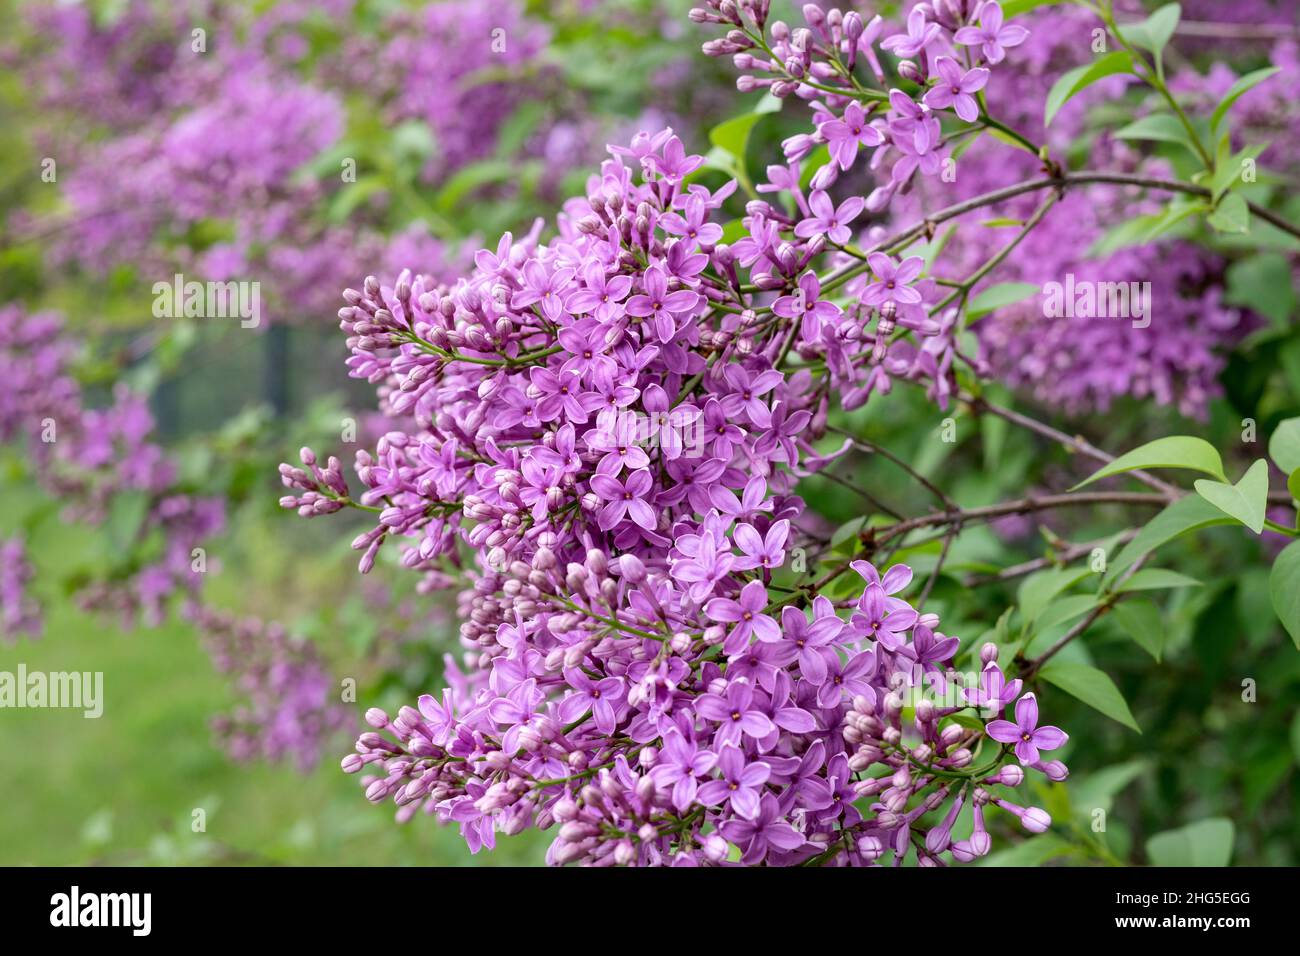 Violet lilac flowers Stock Photo